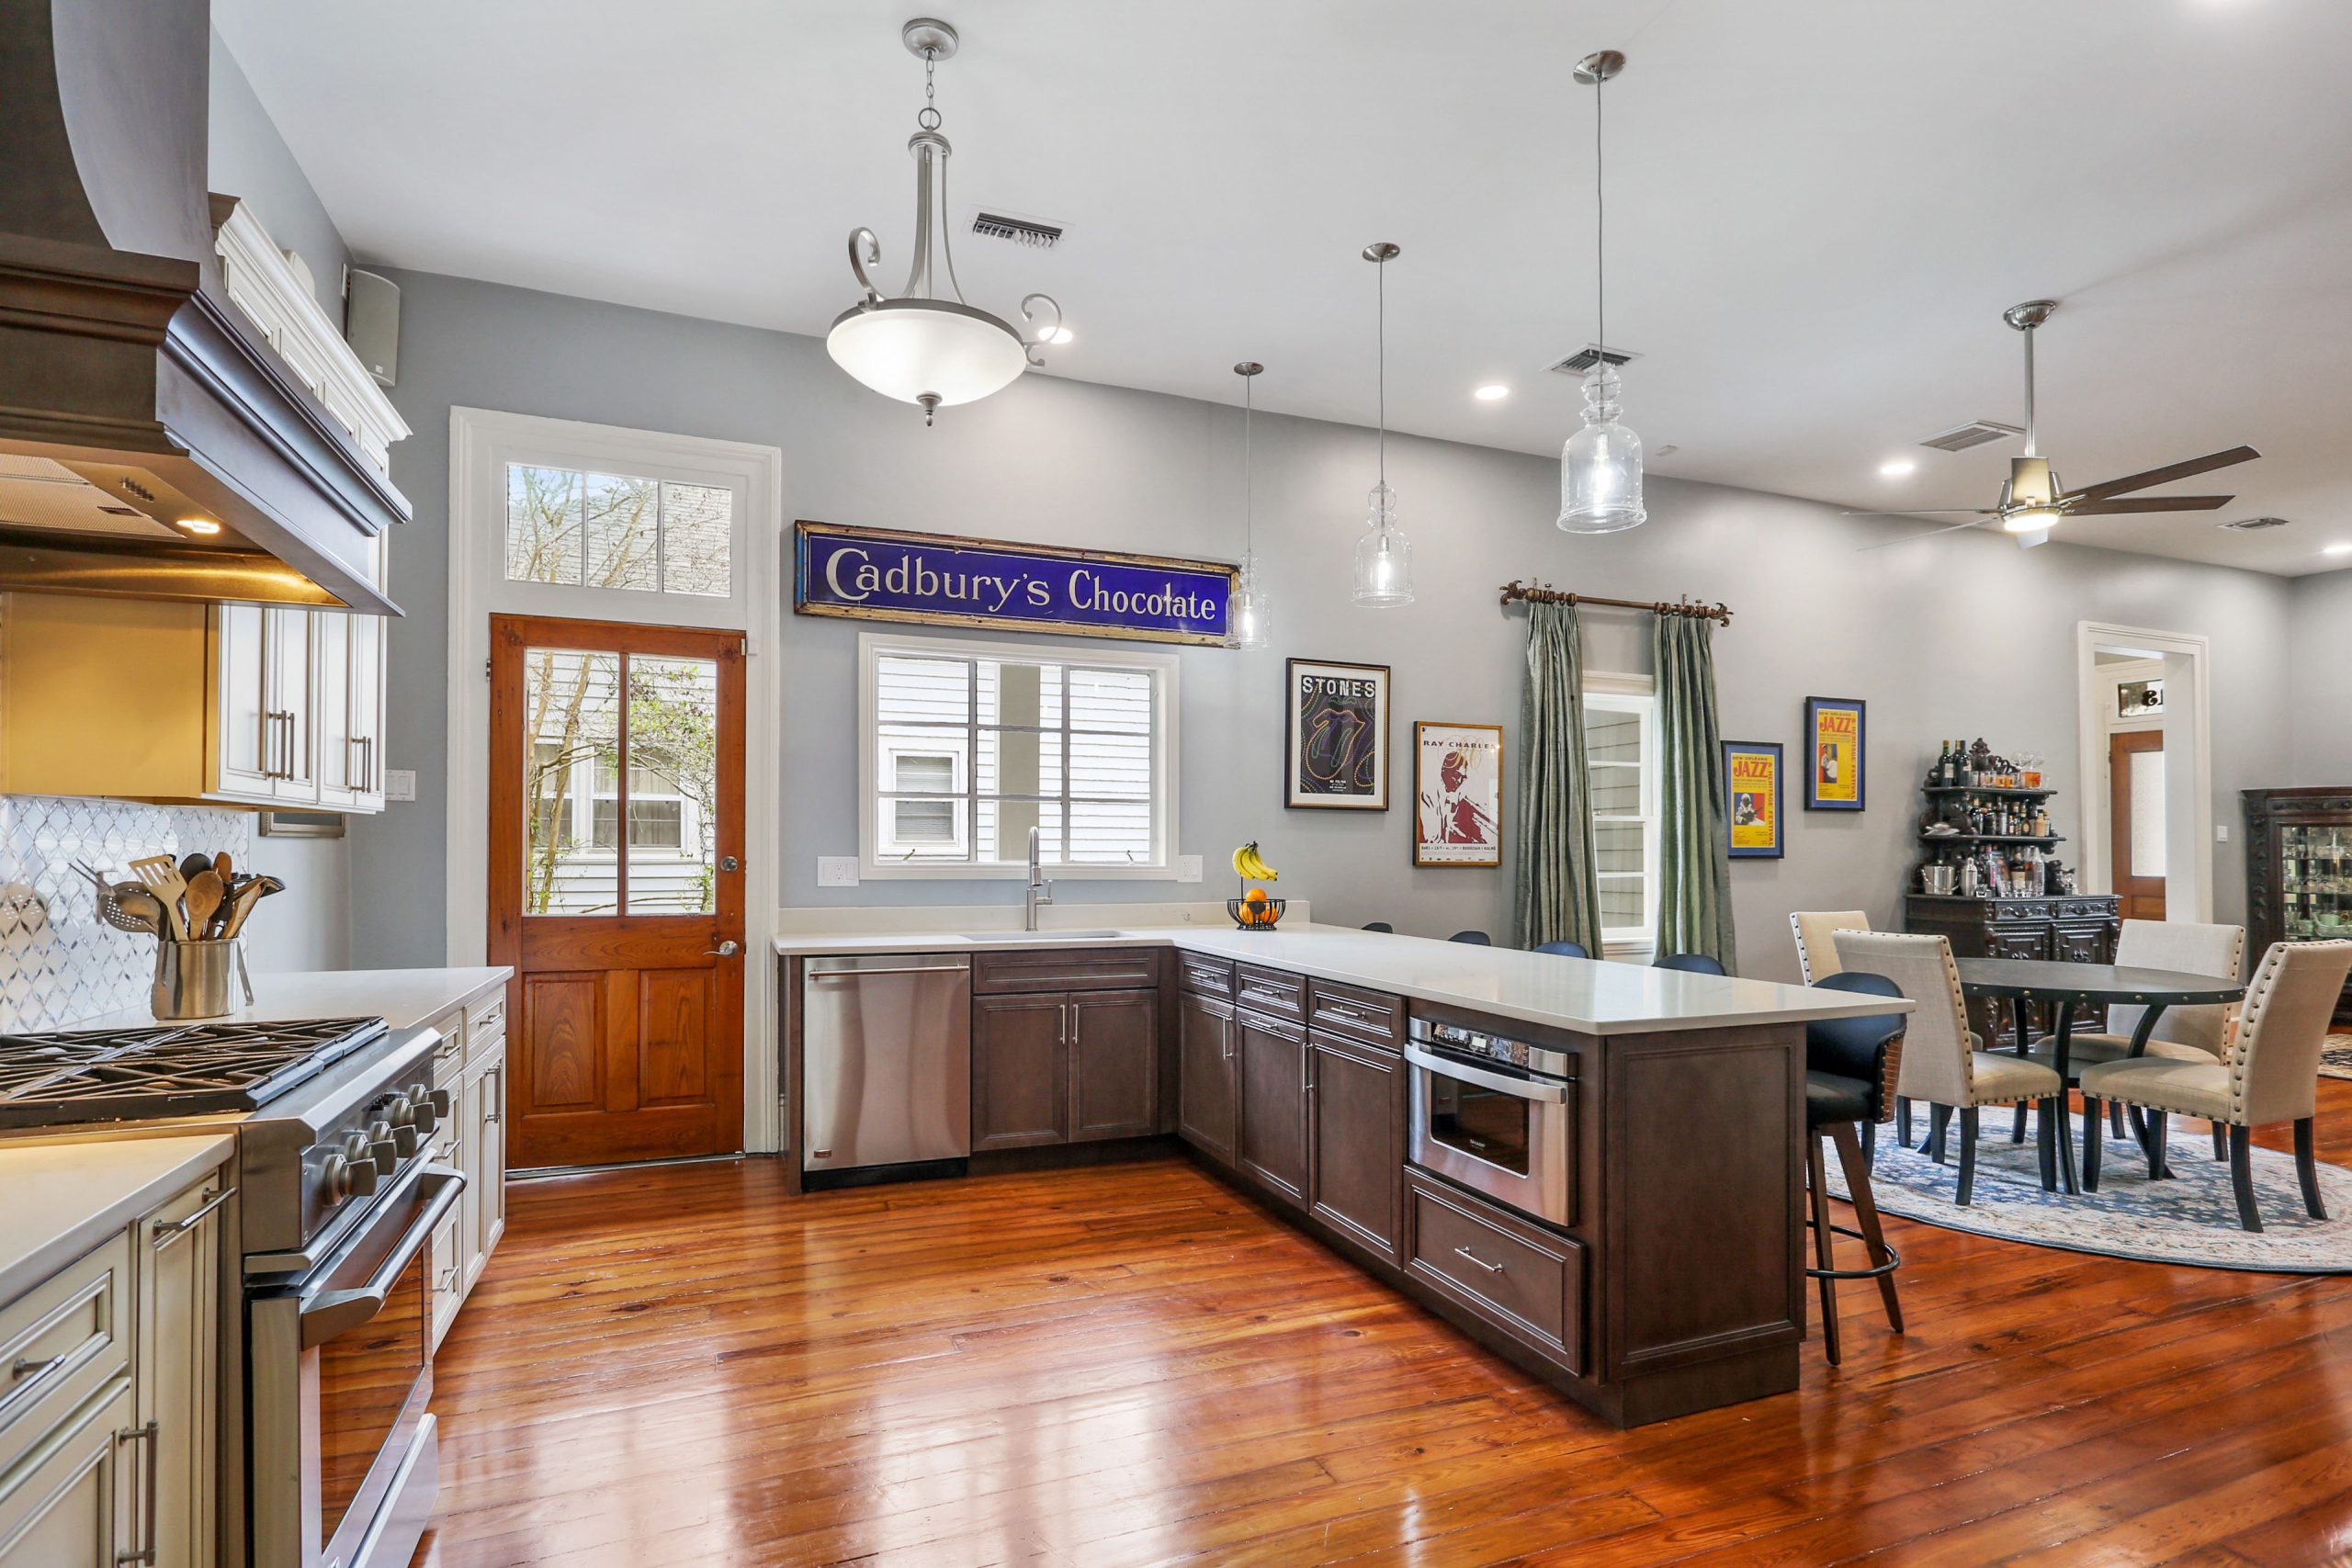 Ursulines House Luxury Historic Home Kitchen Renovation designed and built by DMG Design+Build